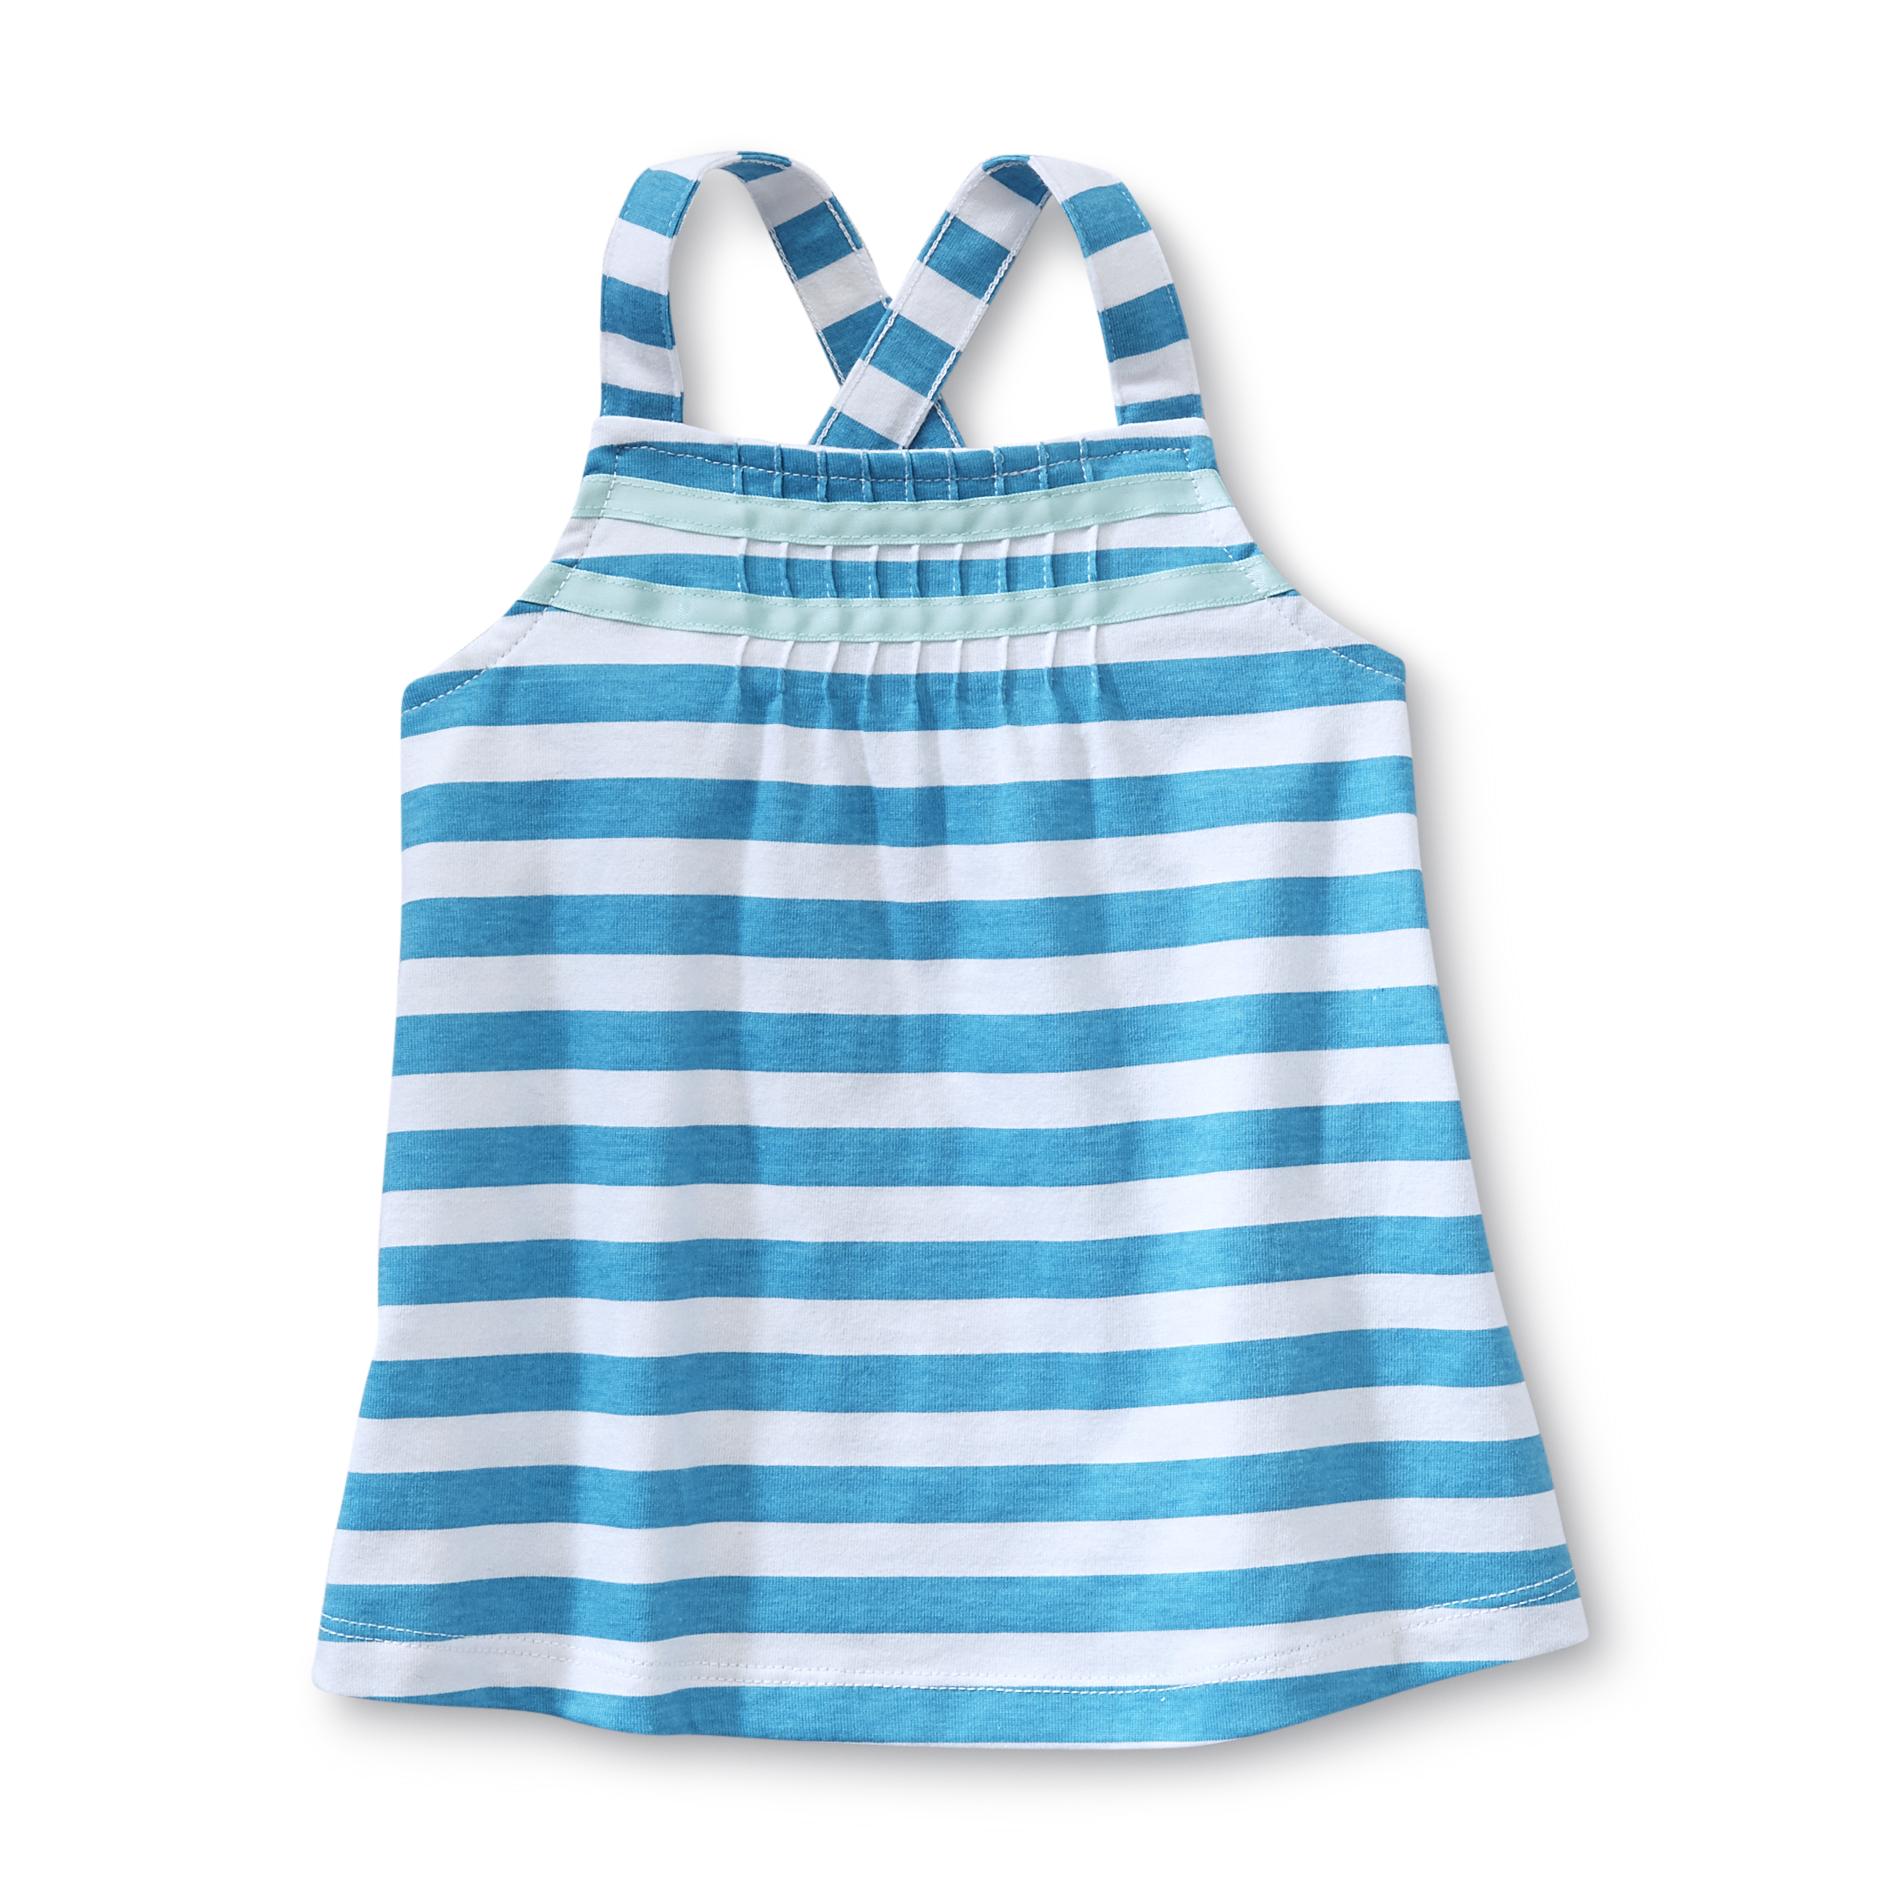 Toughskins Infant & Toddler Girl's Pintucked Tank Top - Striped